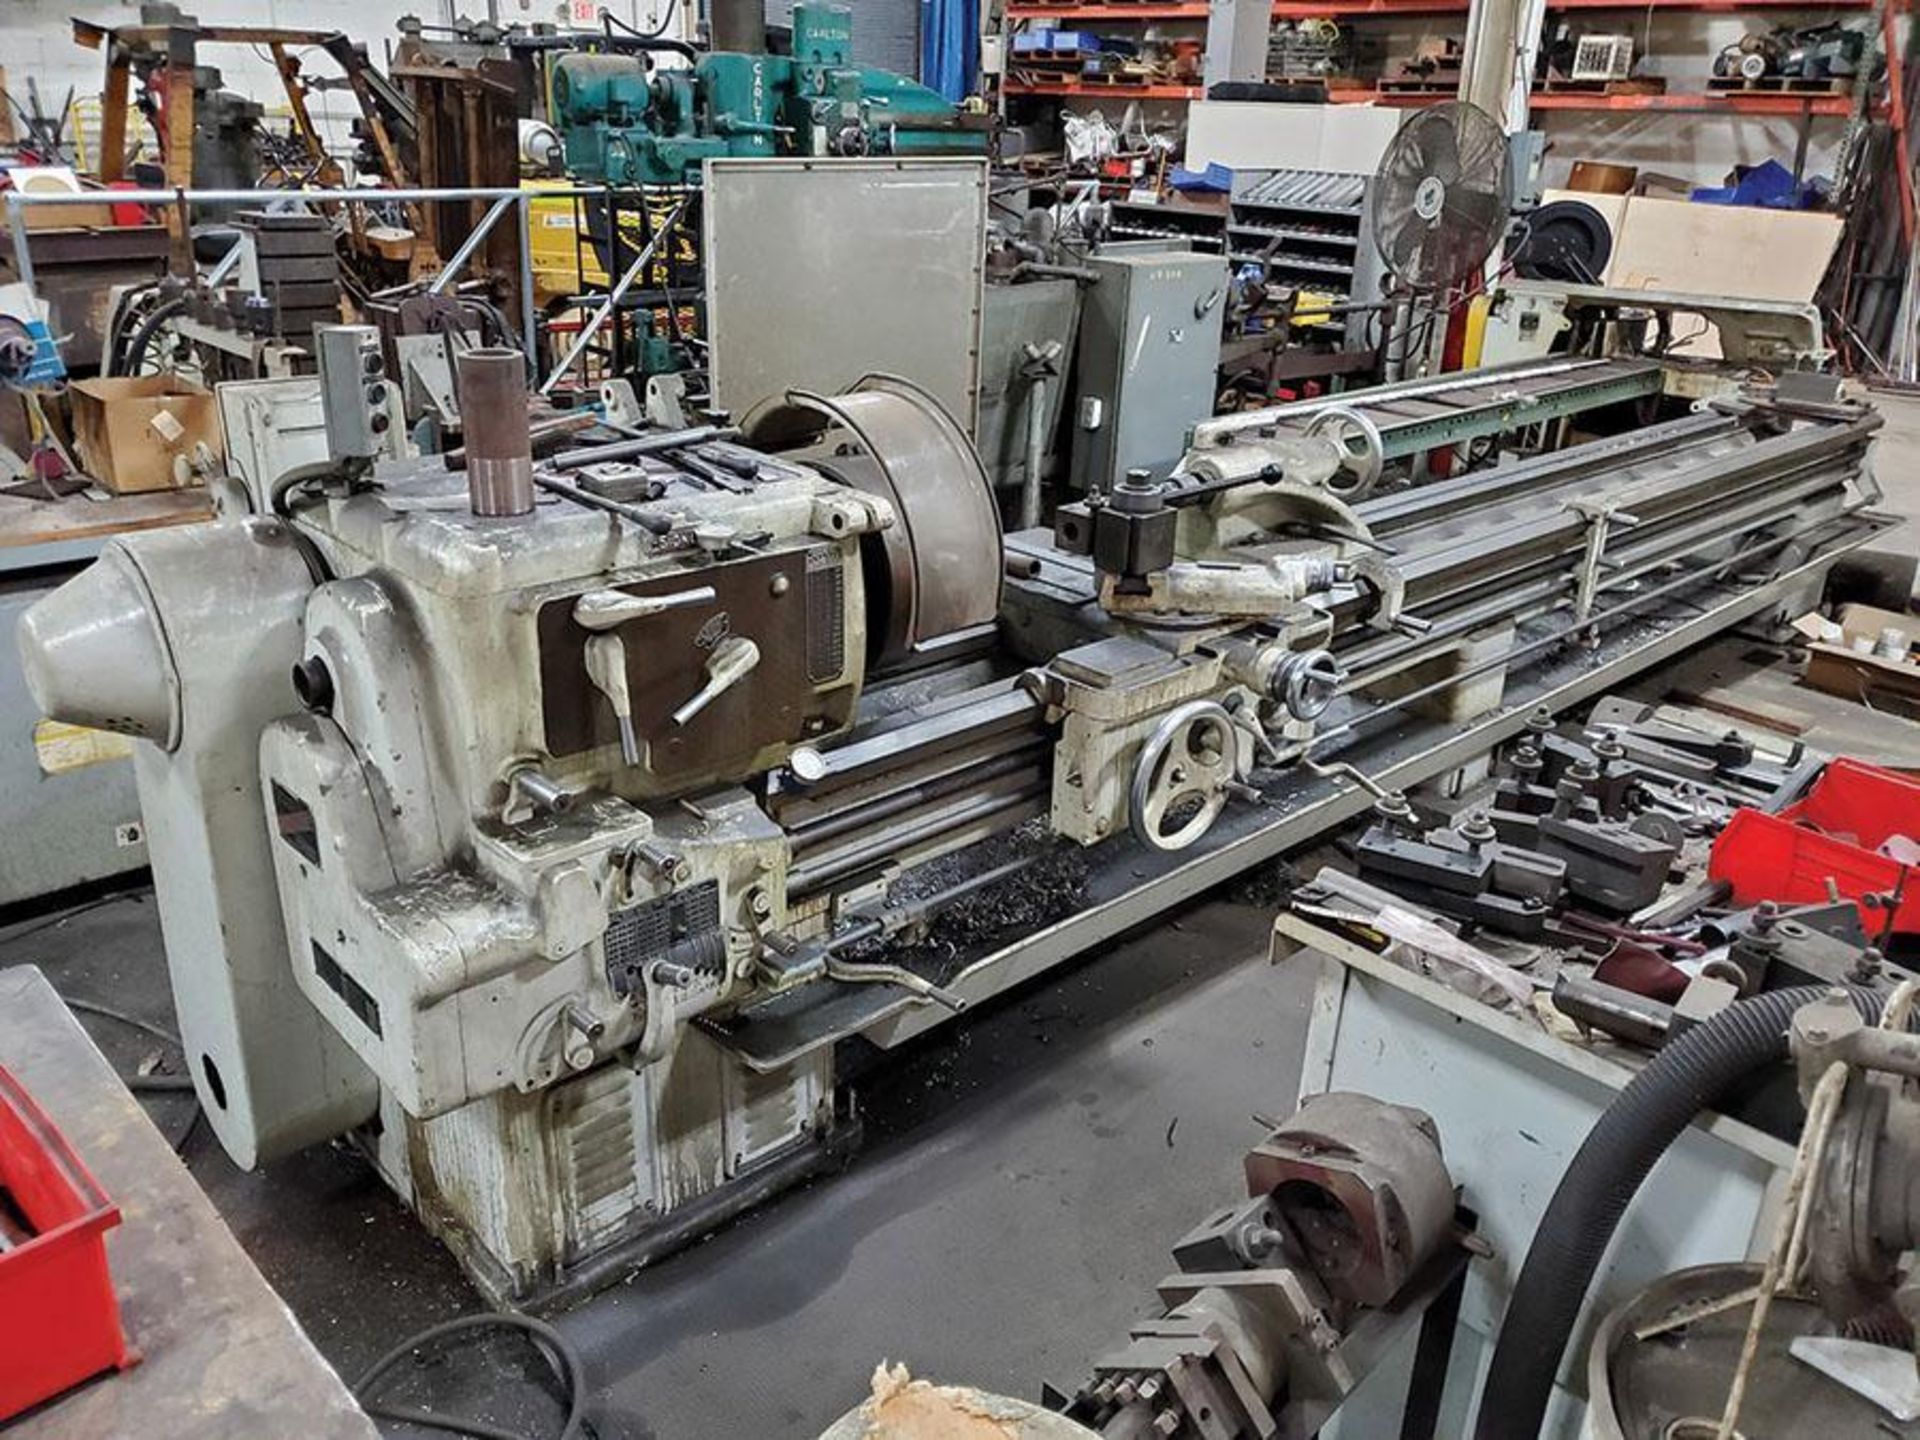 SYDNEY ENGINE LATHE, 16' BED, 2'' BAR THROUGH SPINDLE, 24-720 SPINDLE SPEEDS, TAILSTOCK, CROSS - Image 3 of 18